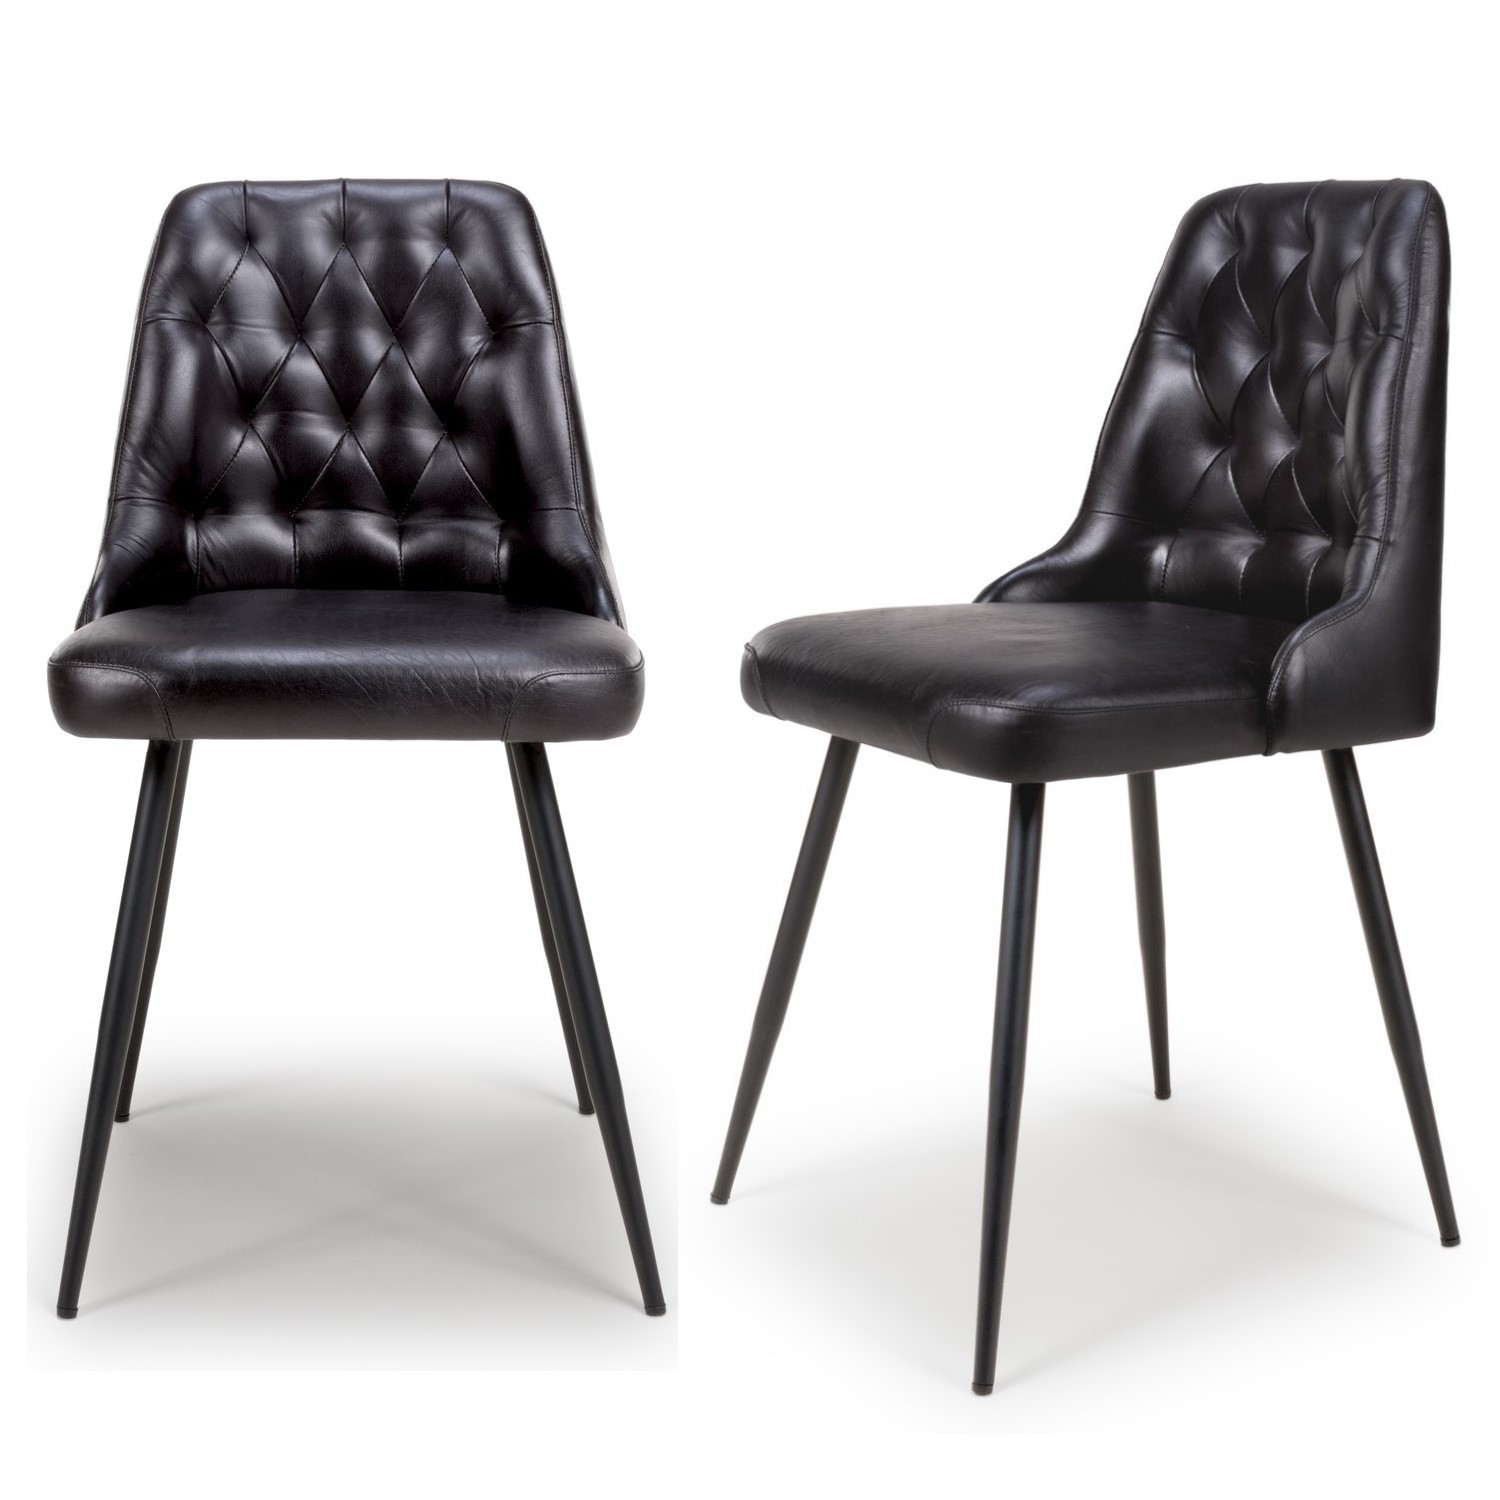 Read more about Set of 2 real leather black dining chair with quilted back jaxson